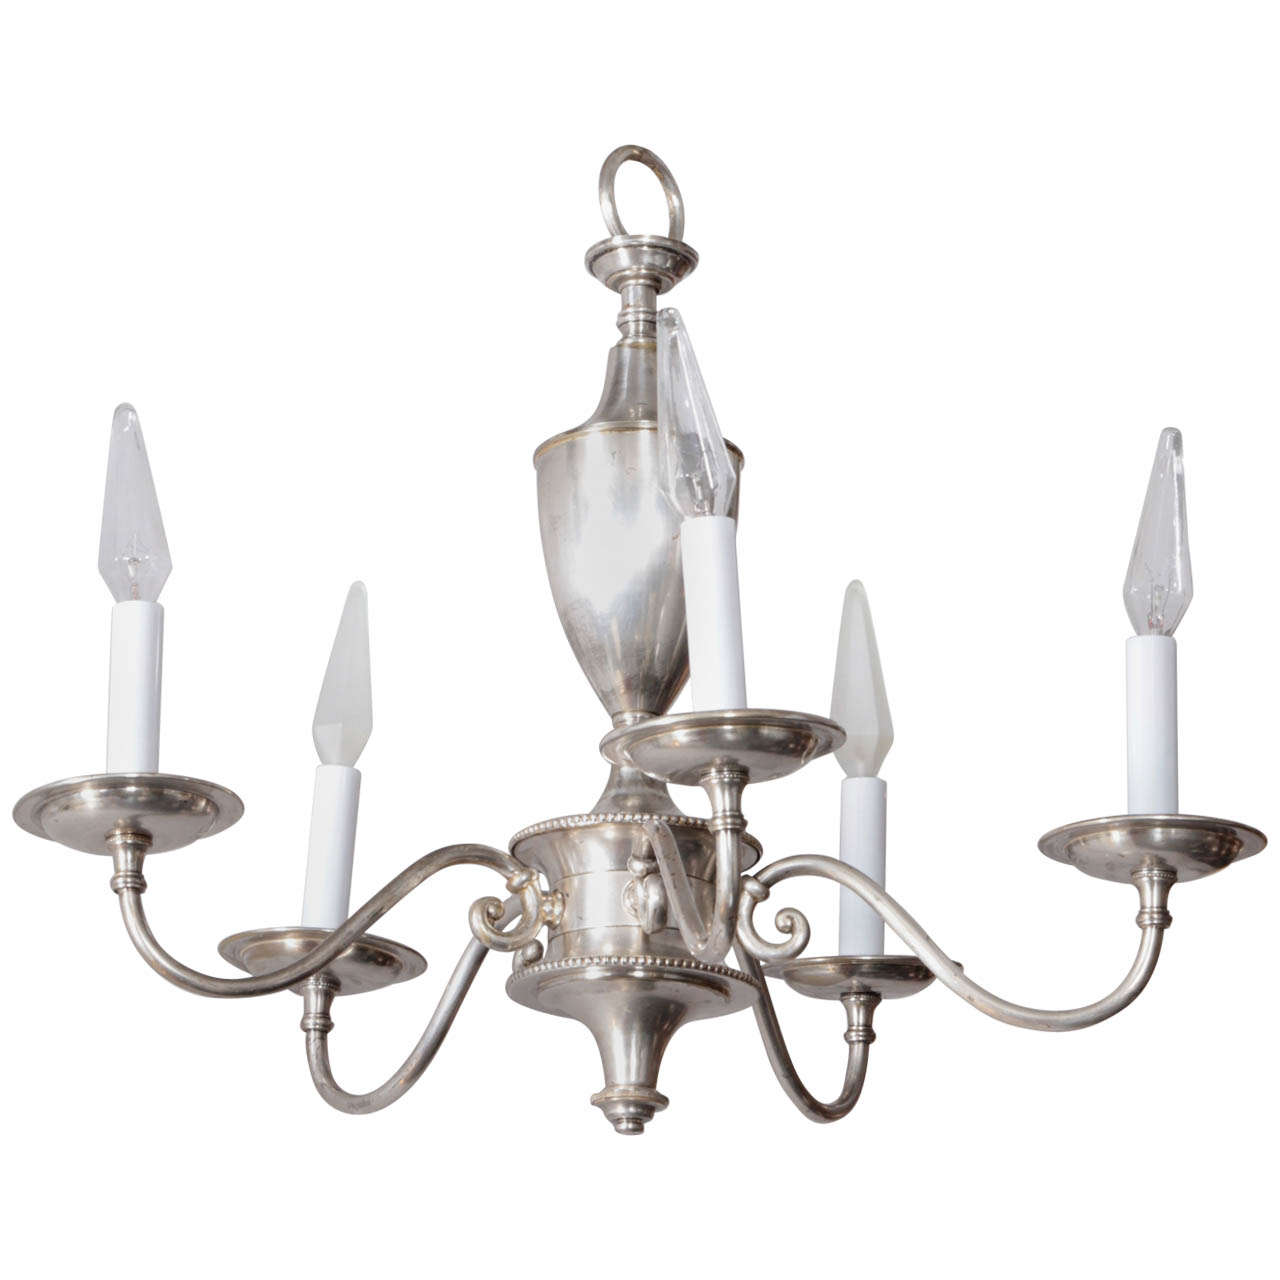 English Silver Plate Chandelier with Five Arms